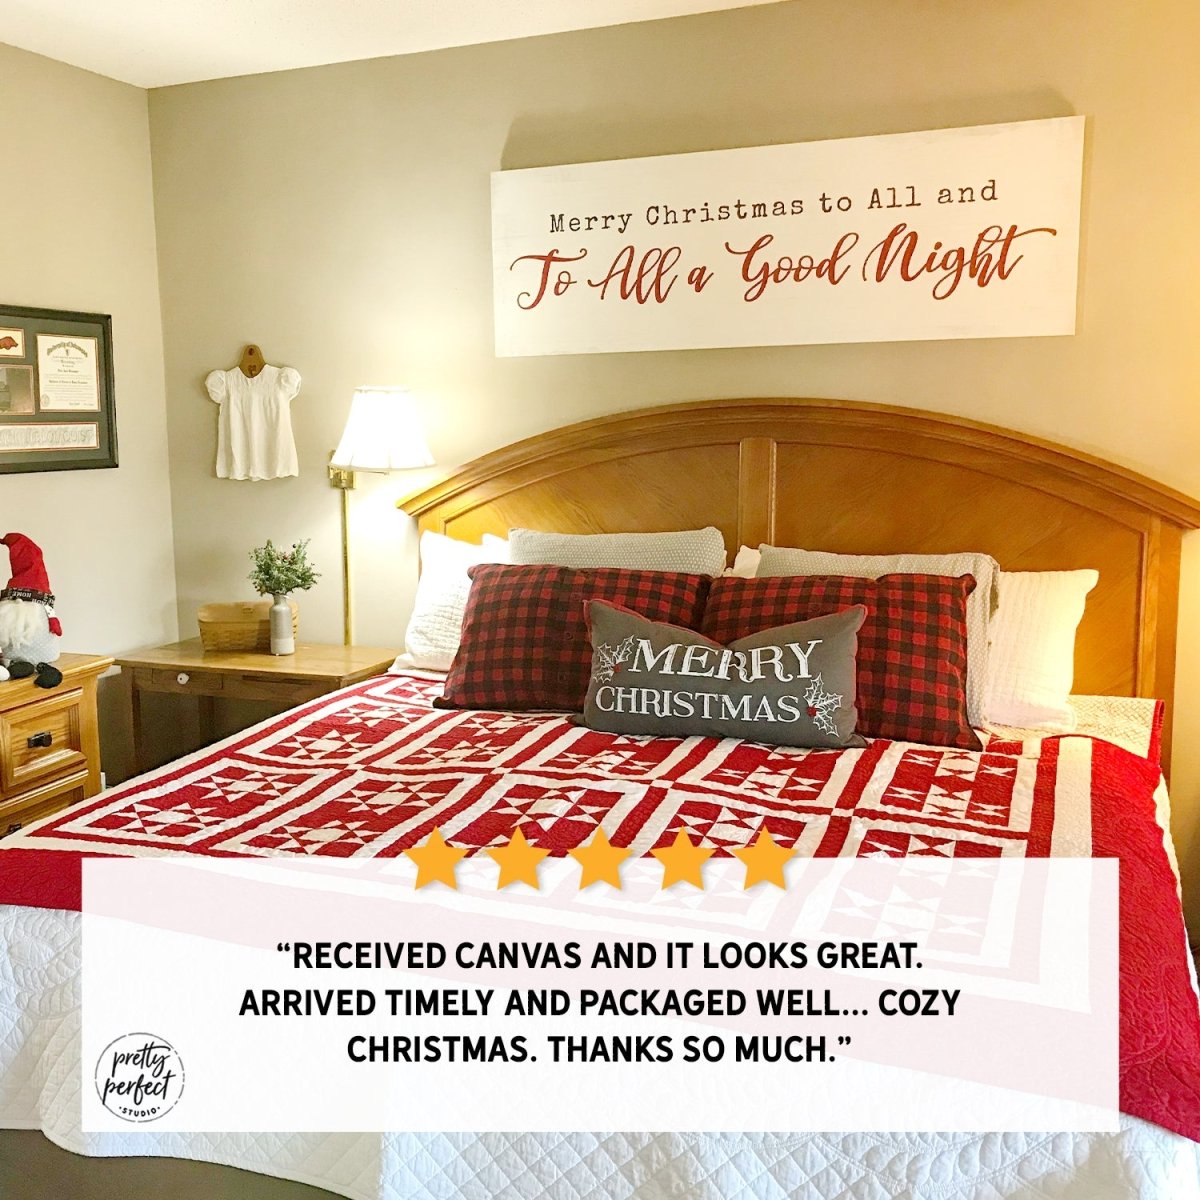 Customer product review for merry christmas to all and to all a good night sign by Pretty Perfect Studio